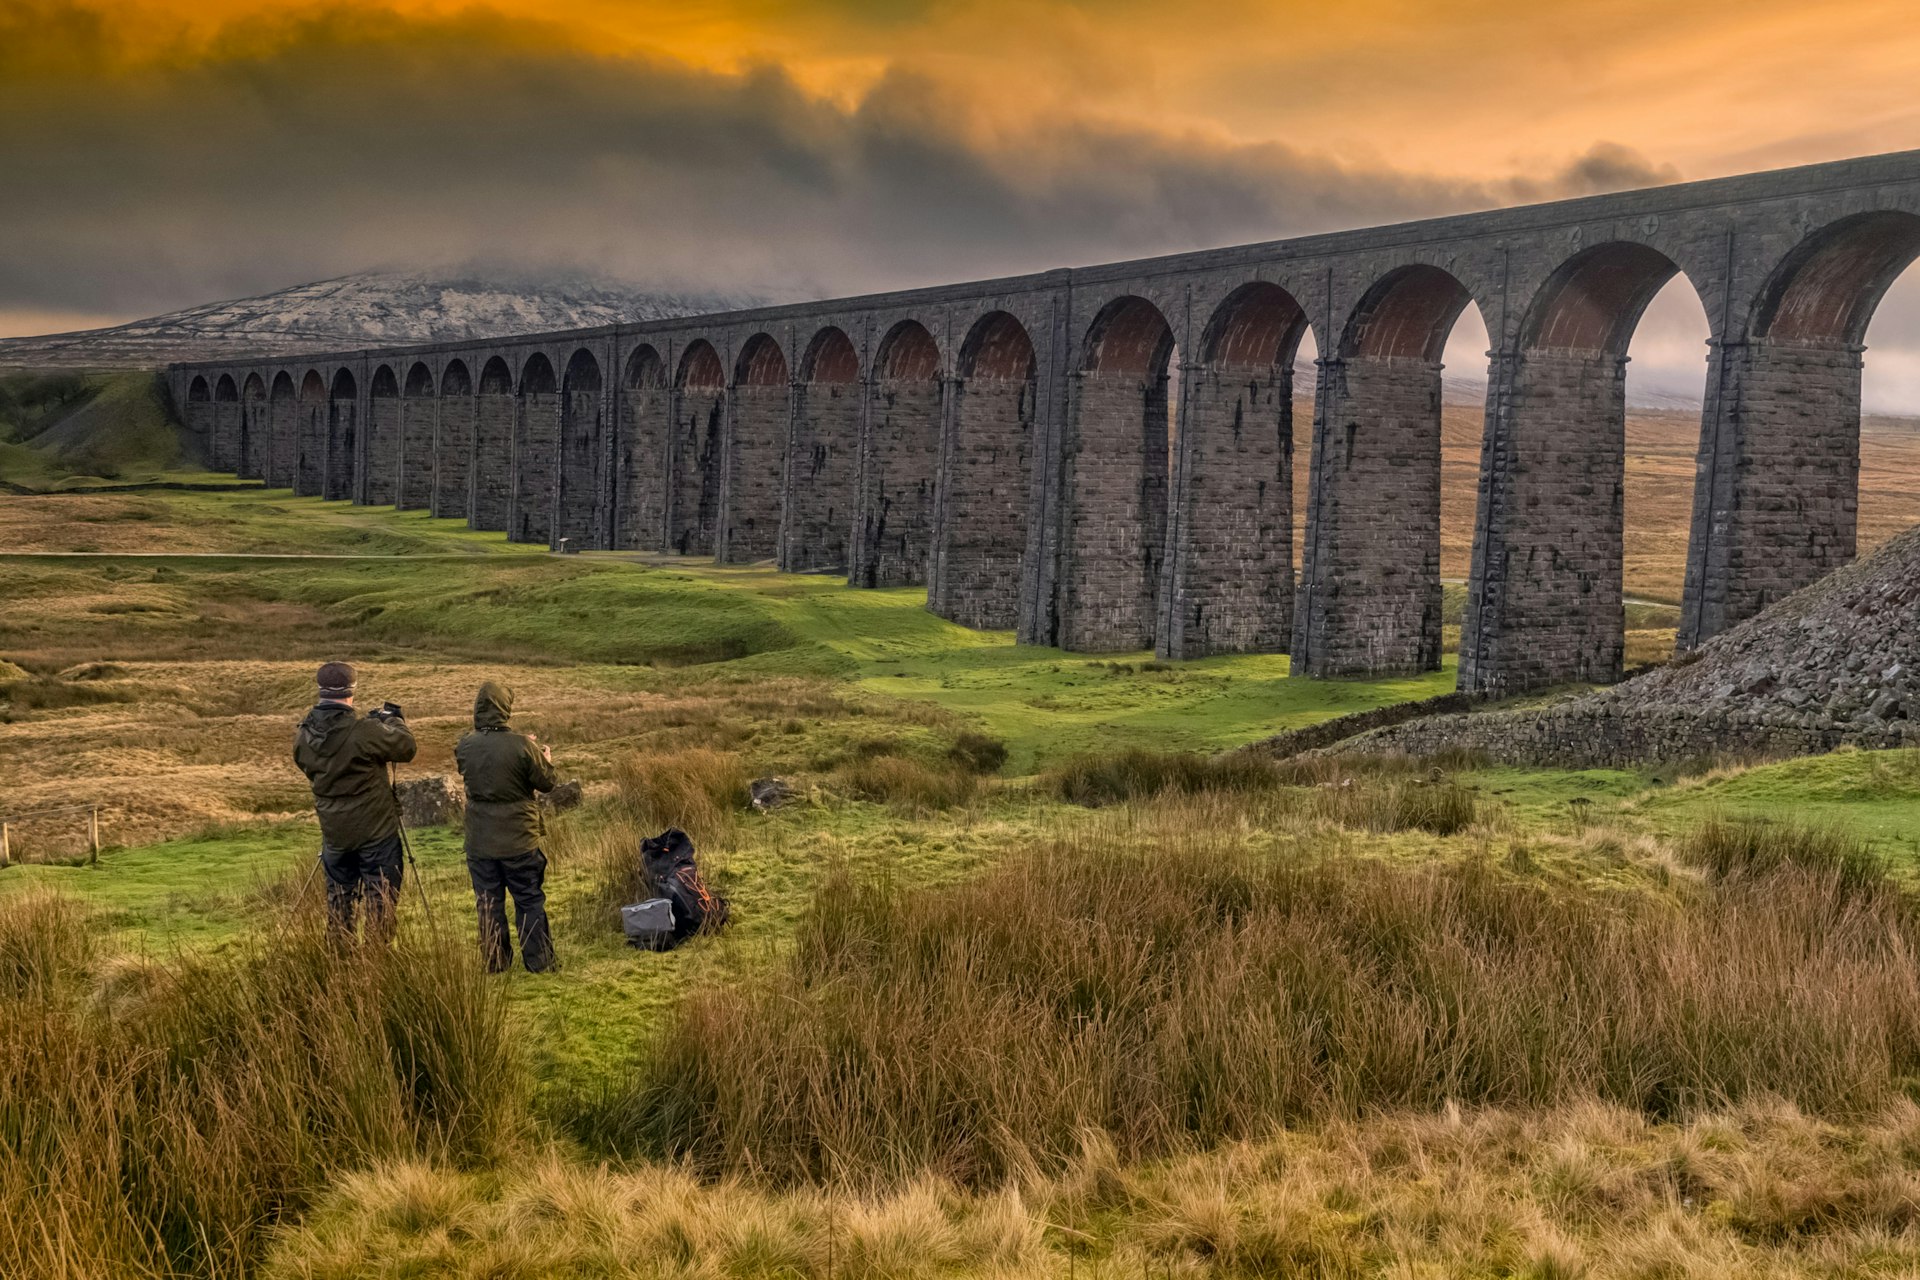 Photographers capturing the Ribblehead Viaduct in the Yorkshire Dales